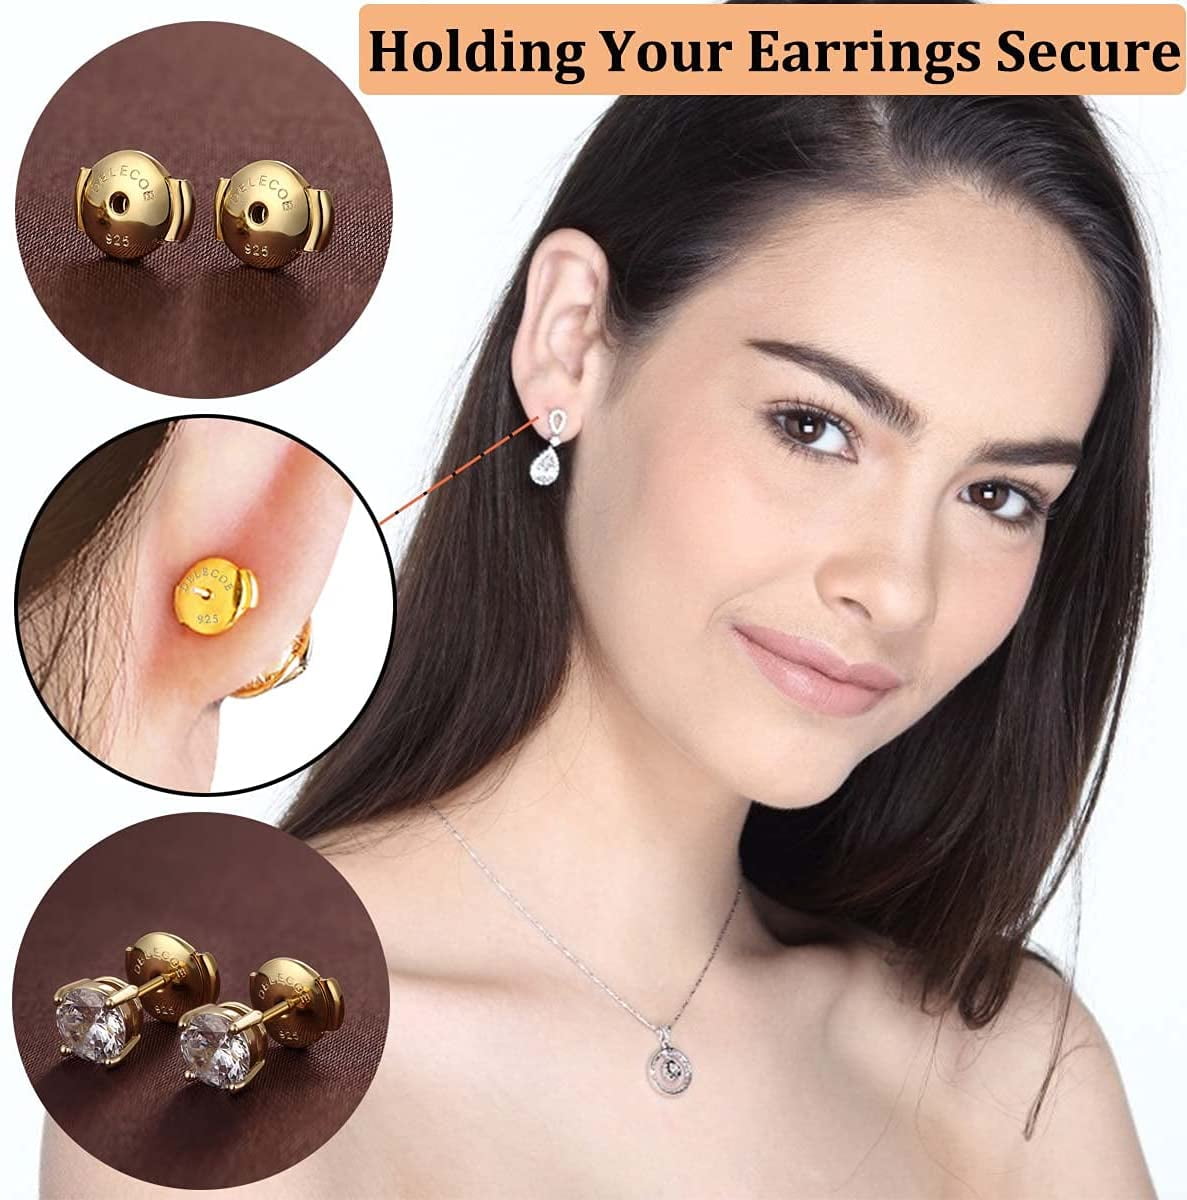 Siwoms 2 Pairs Silver Locking Earring Backs Secure for Diamond Studs, Hypoallergenic Replacements Earring Backings for Notched Post